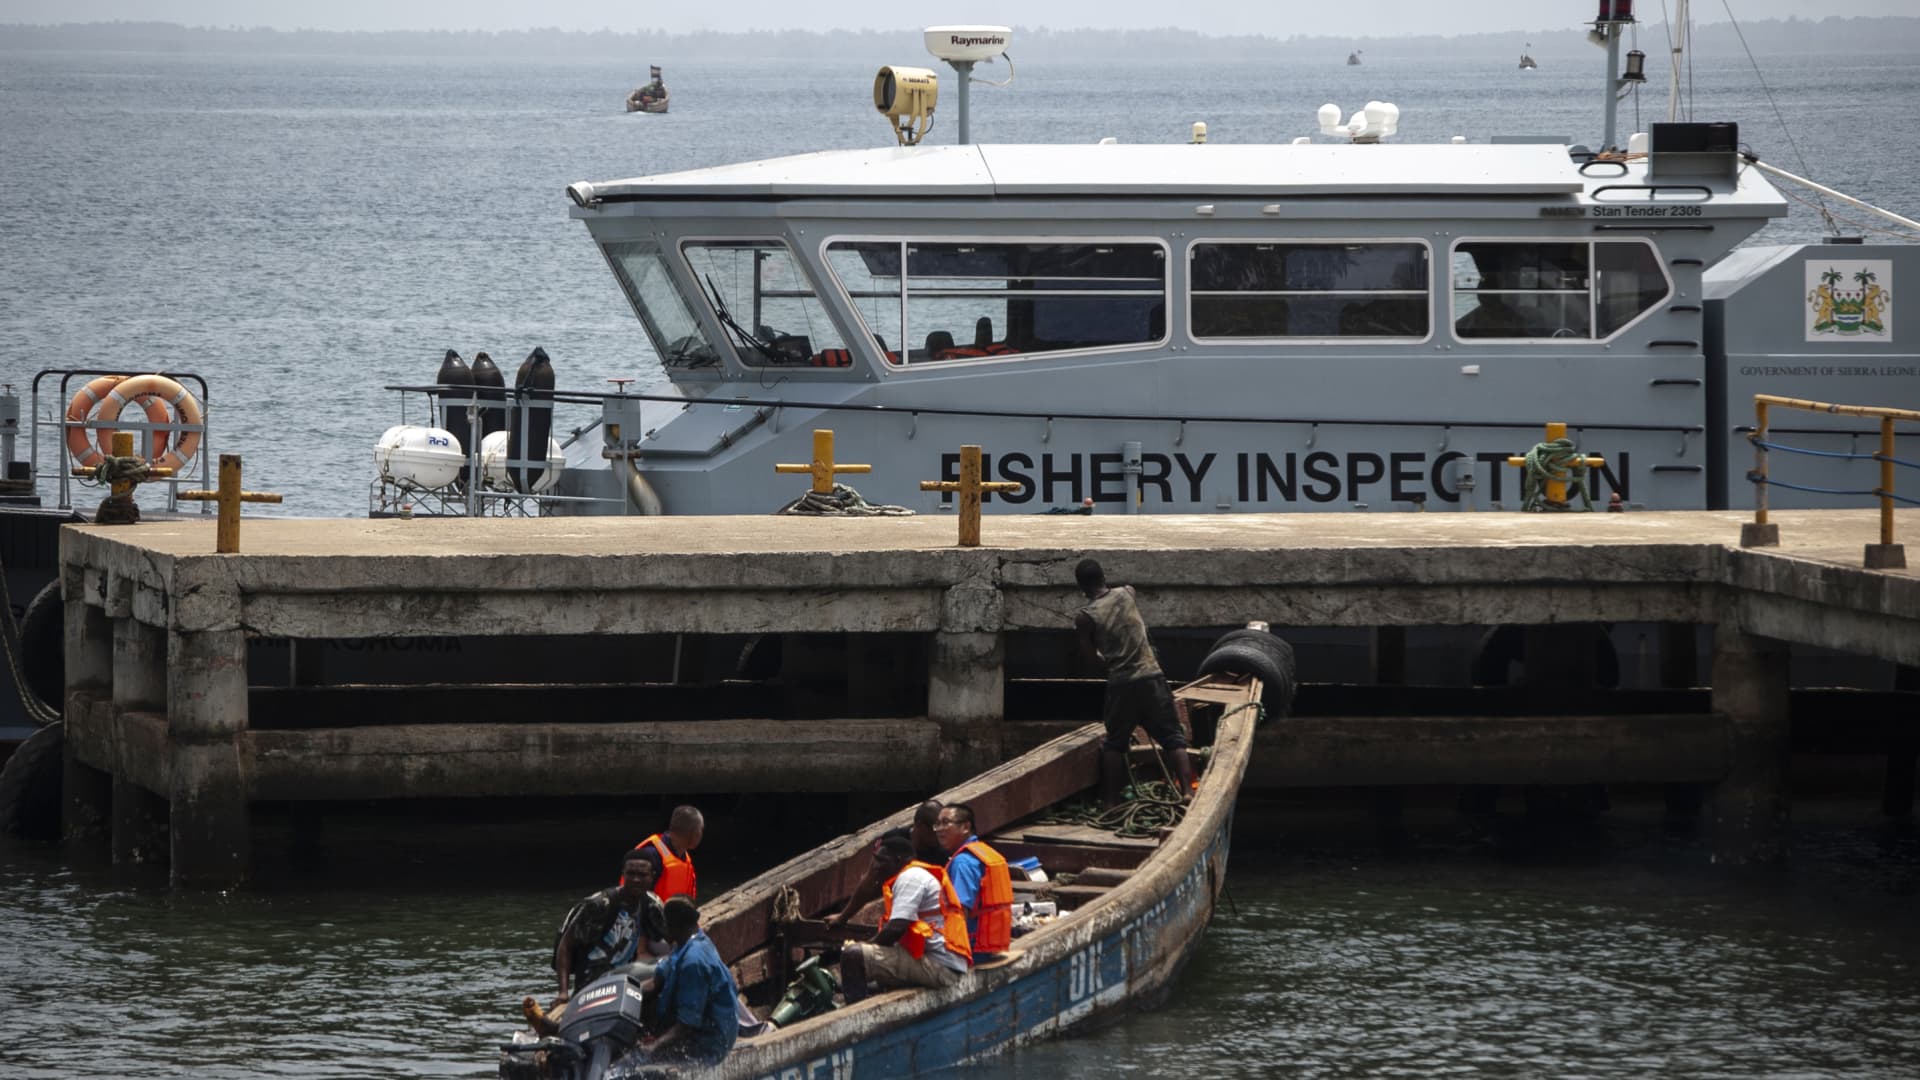 Chinese fishermen in a wooden carved boat are seen at the port in Freetown's Murray Town suburb on April 8, 2019 with the only Joint Maritime Committee (JMC) offshore patrol boat, donated by the World Bank, in the background.